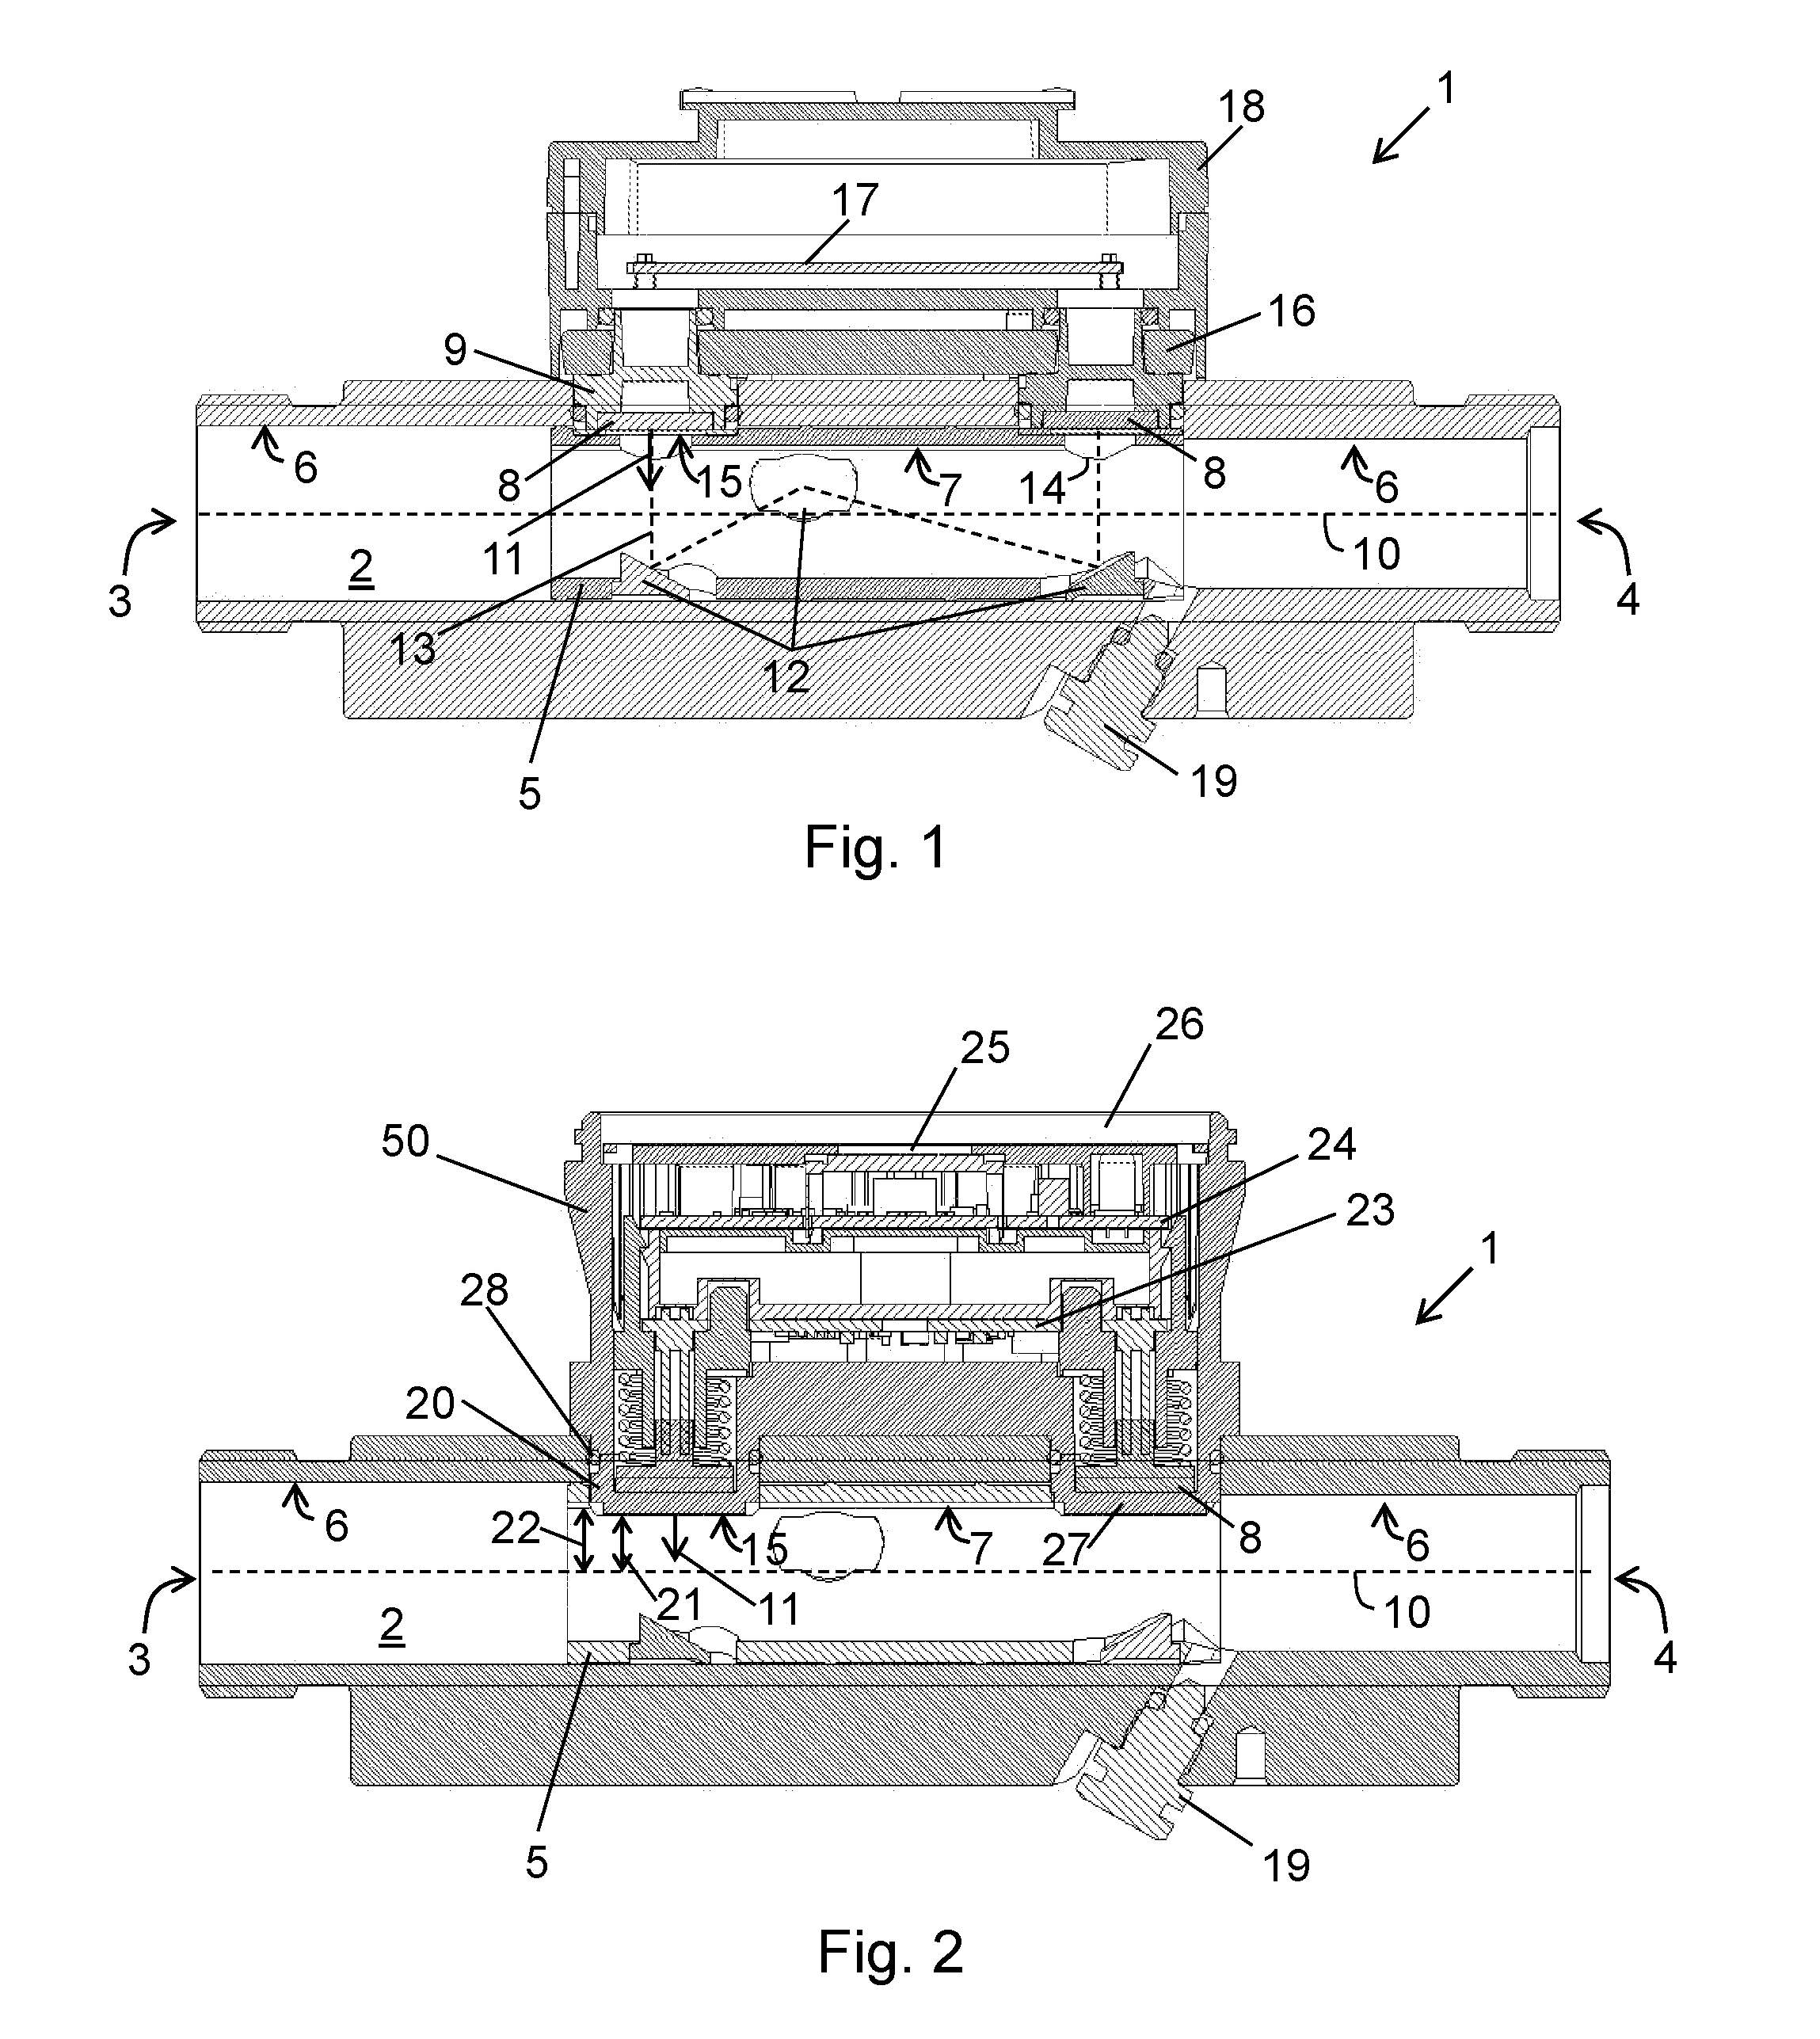 Flow meter with protruding transducers